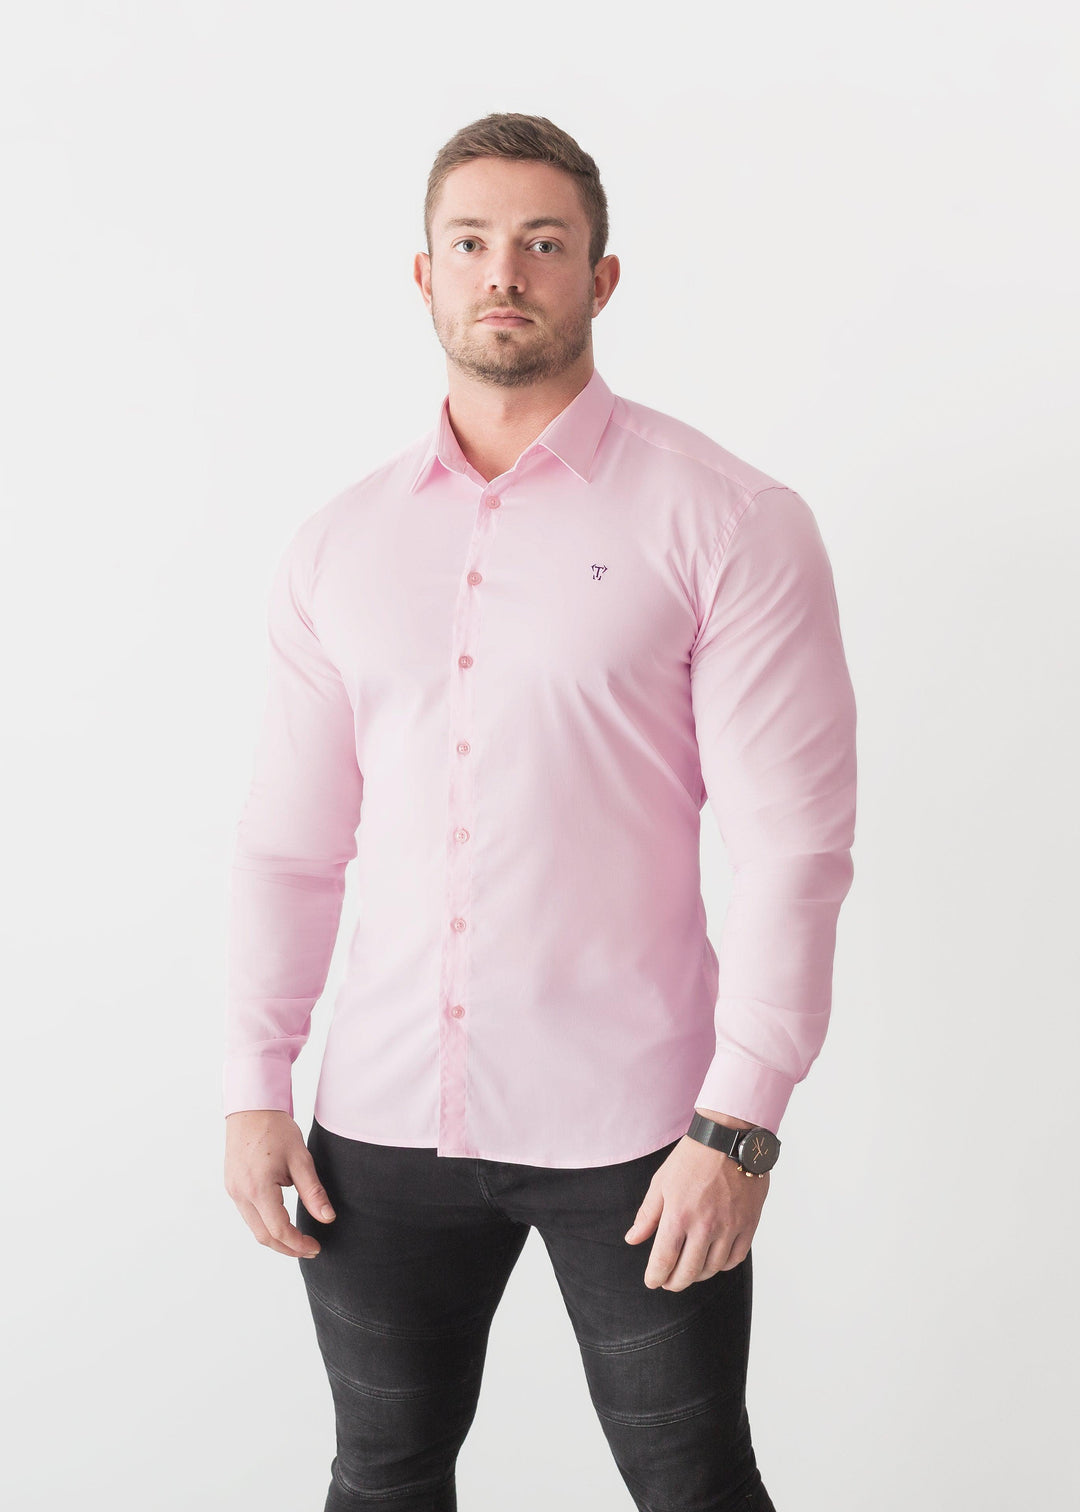 Hot Pink Men's Long Sleeve T Shirt  Premium Menswear at Best Value Prices